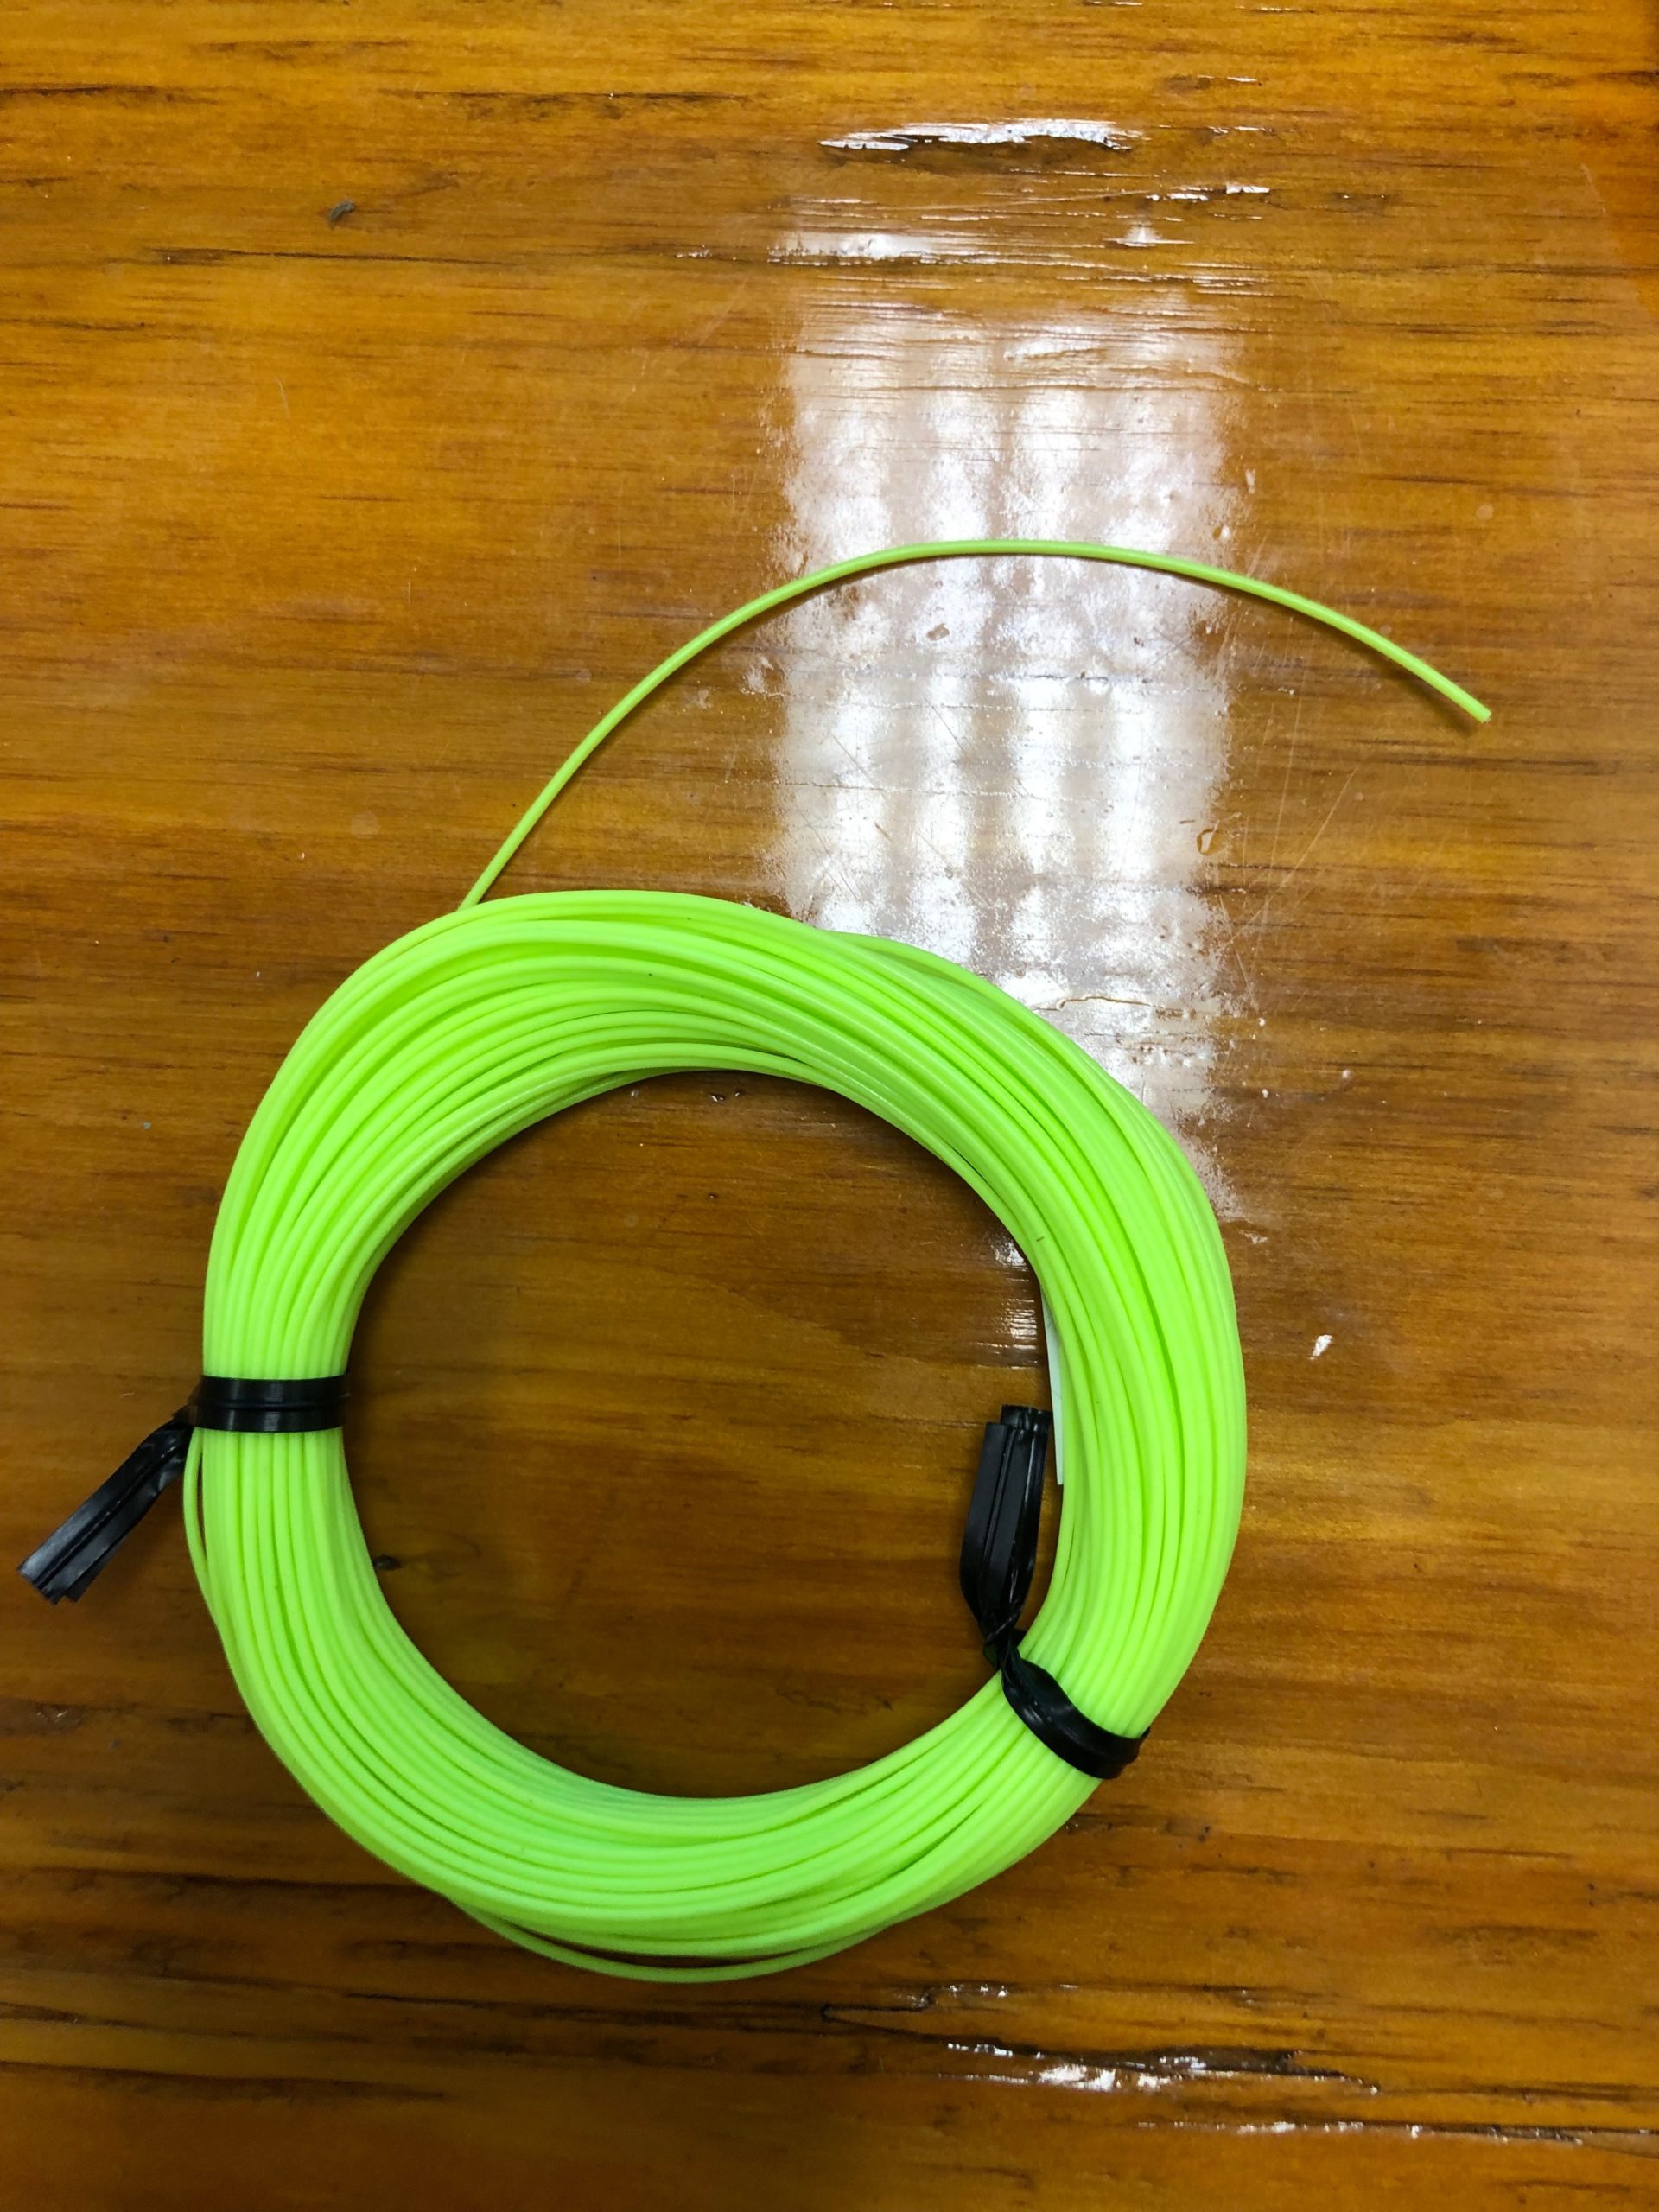 A green fishing line on a wooden table.